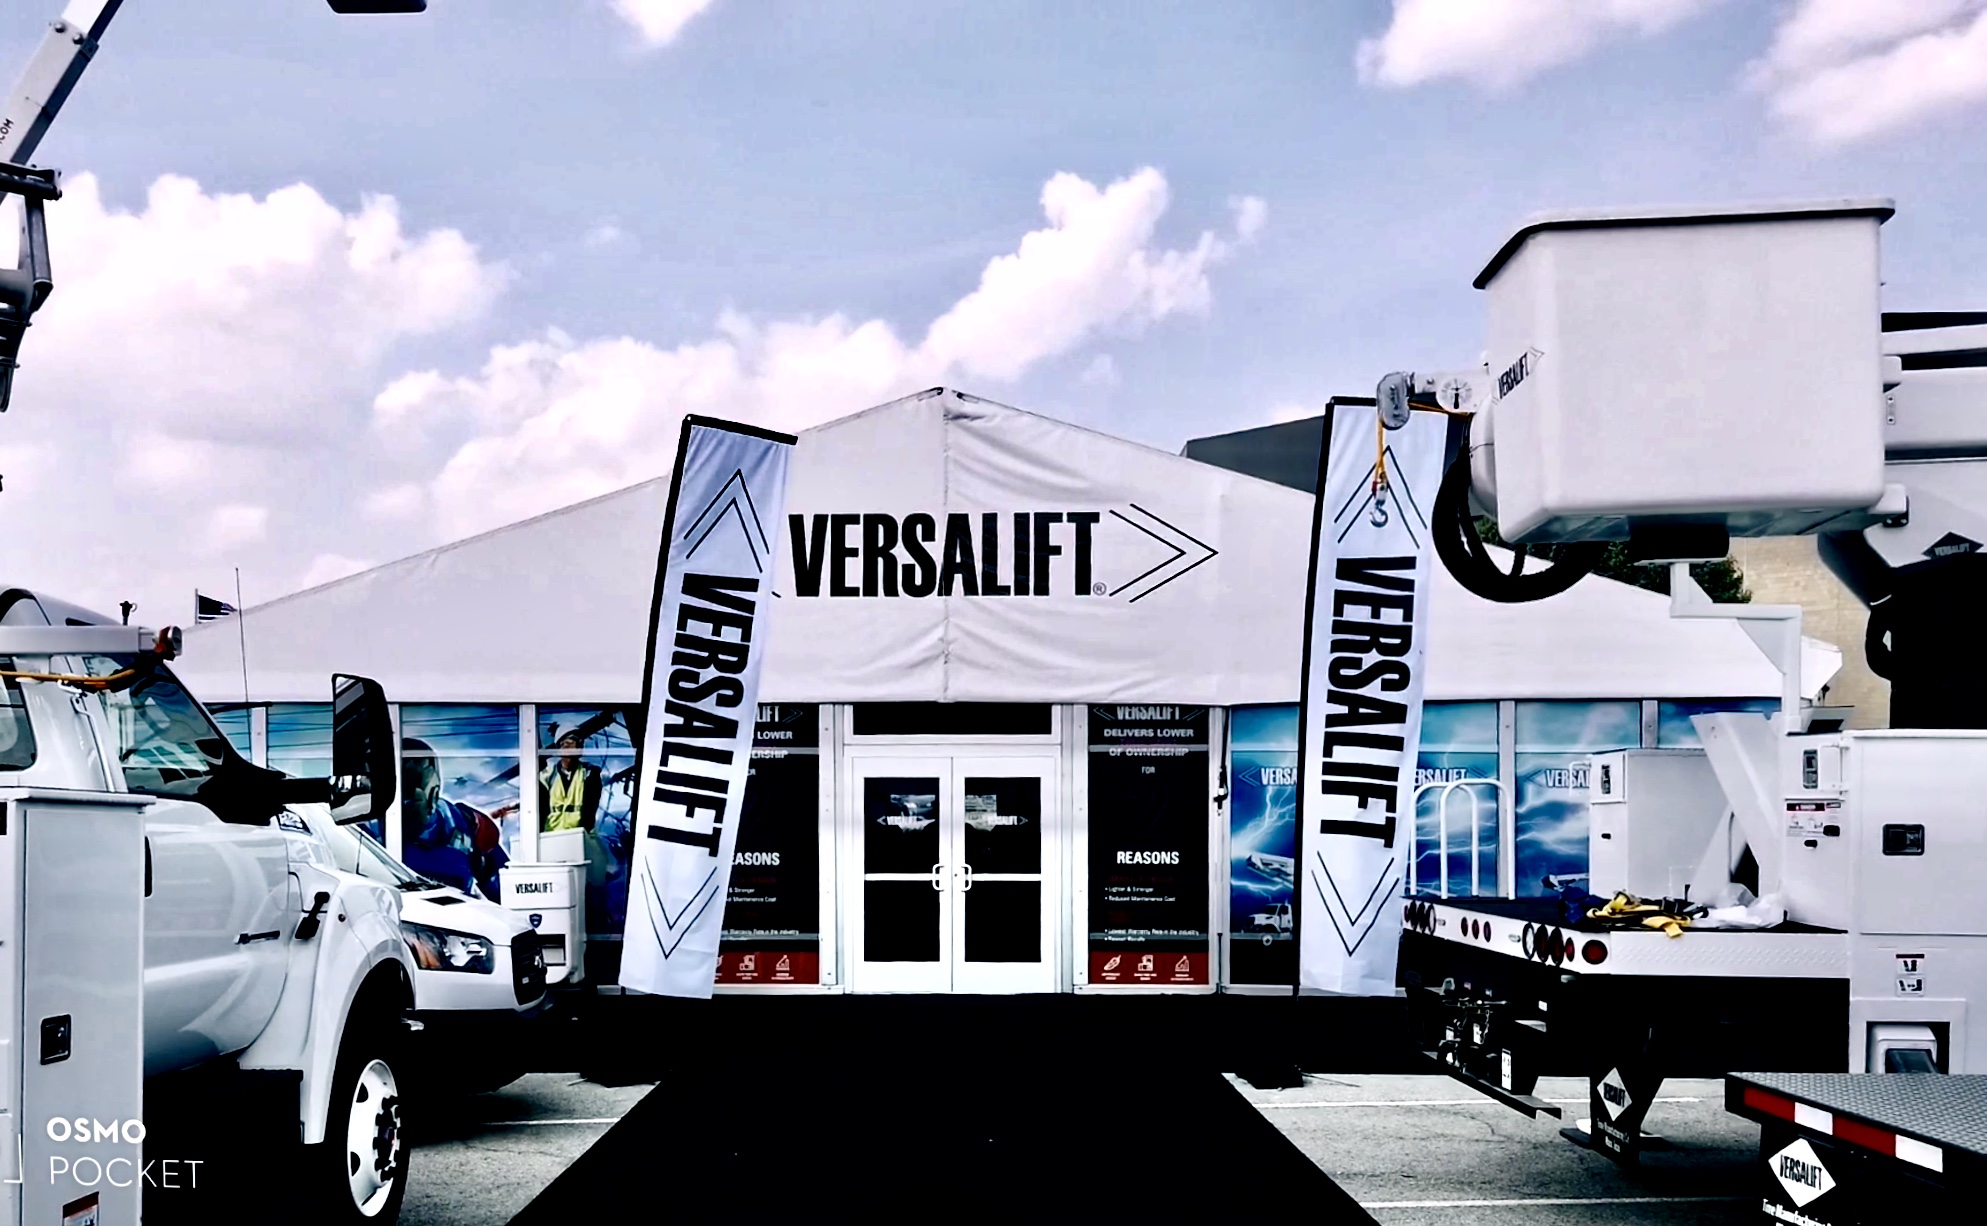 Versalift Launches Distribution Construction Units and Boom Speed Improvements at ICUEE 2019